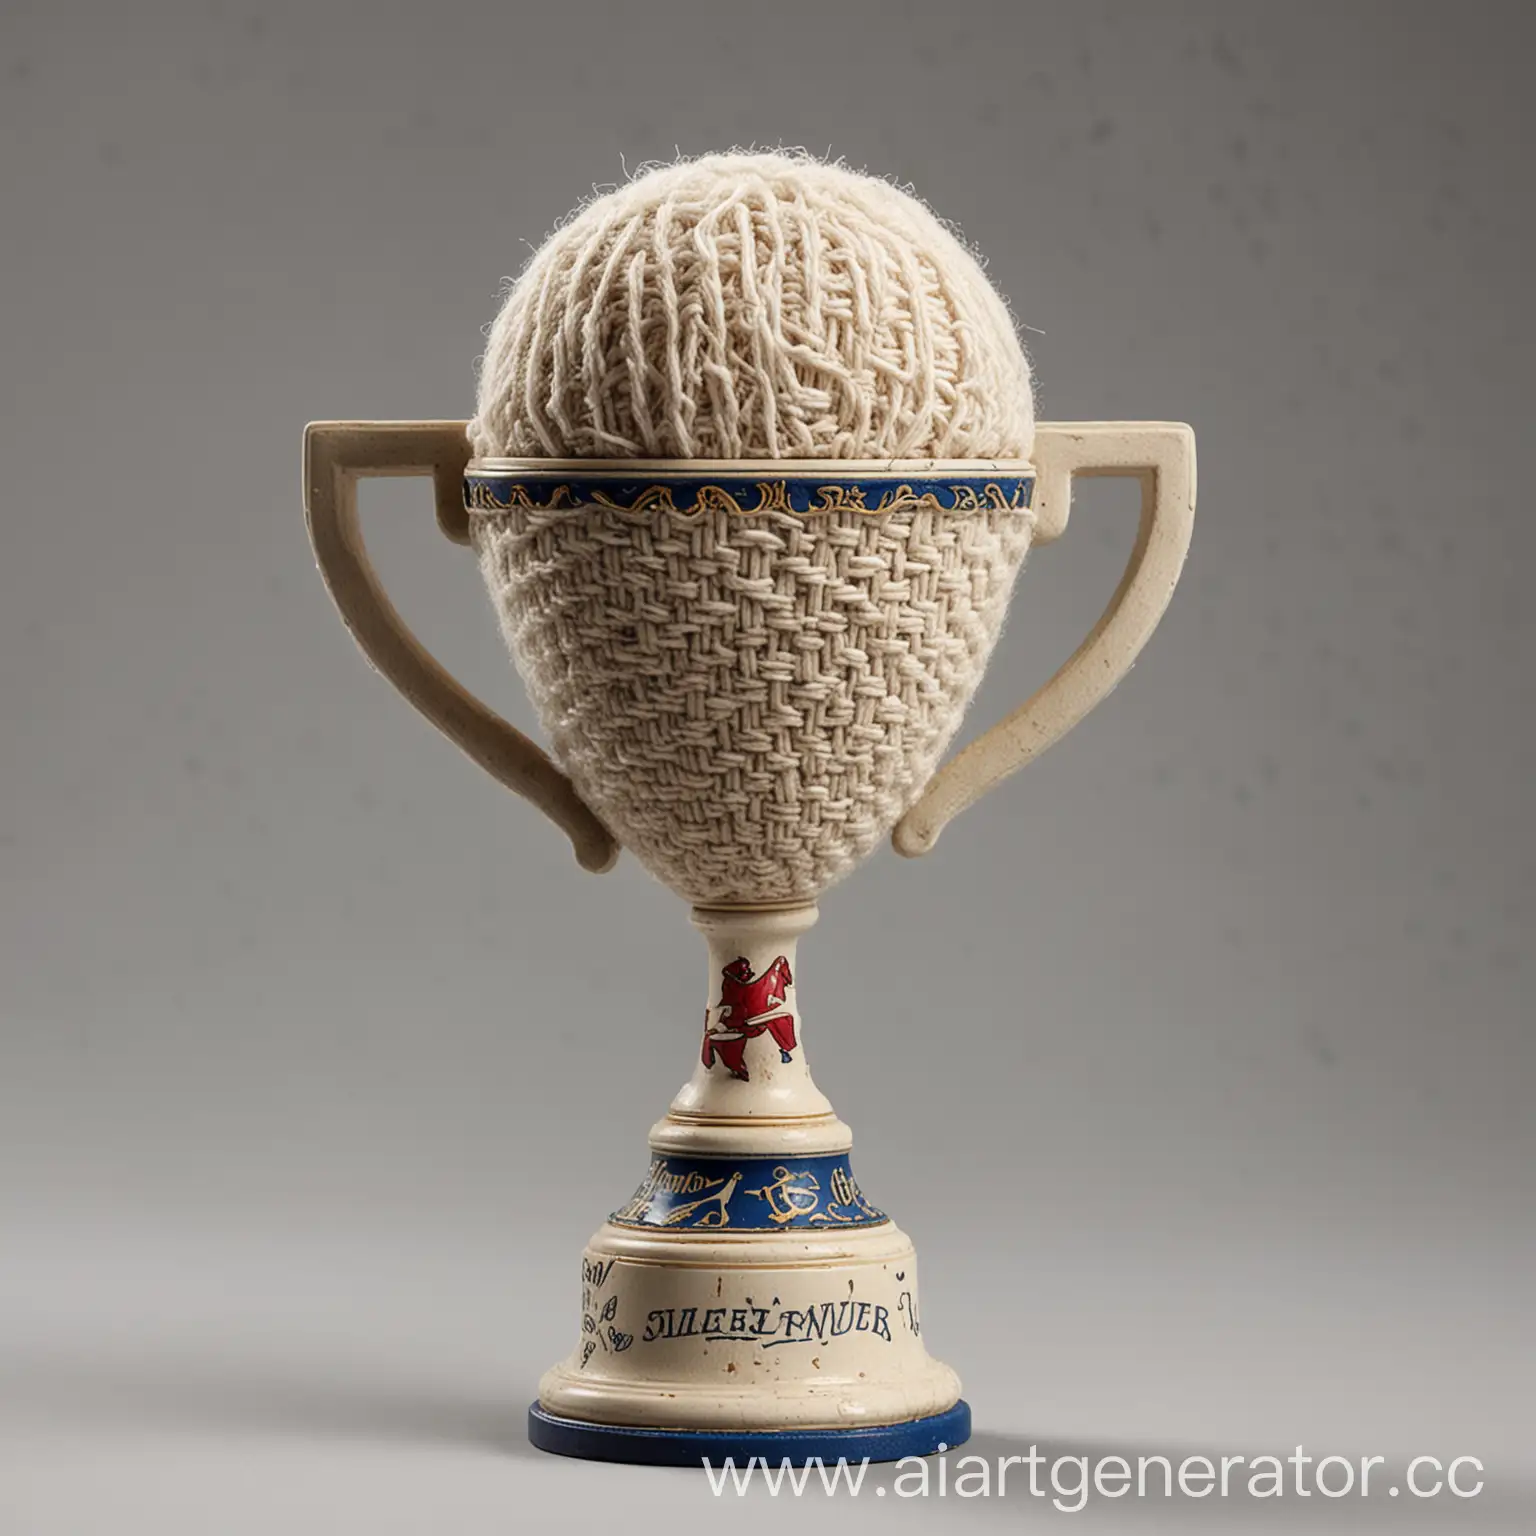 Woolen-Ball-Victory-Cup-Symbol-of-Triumph-and-Achievement